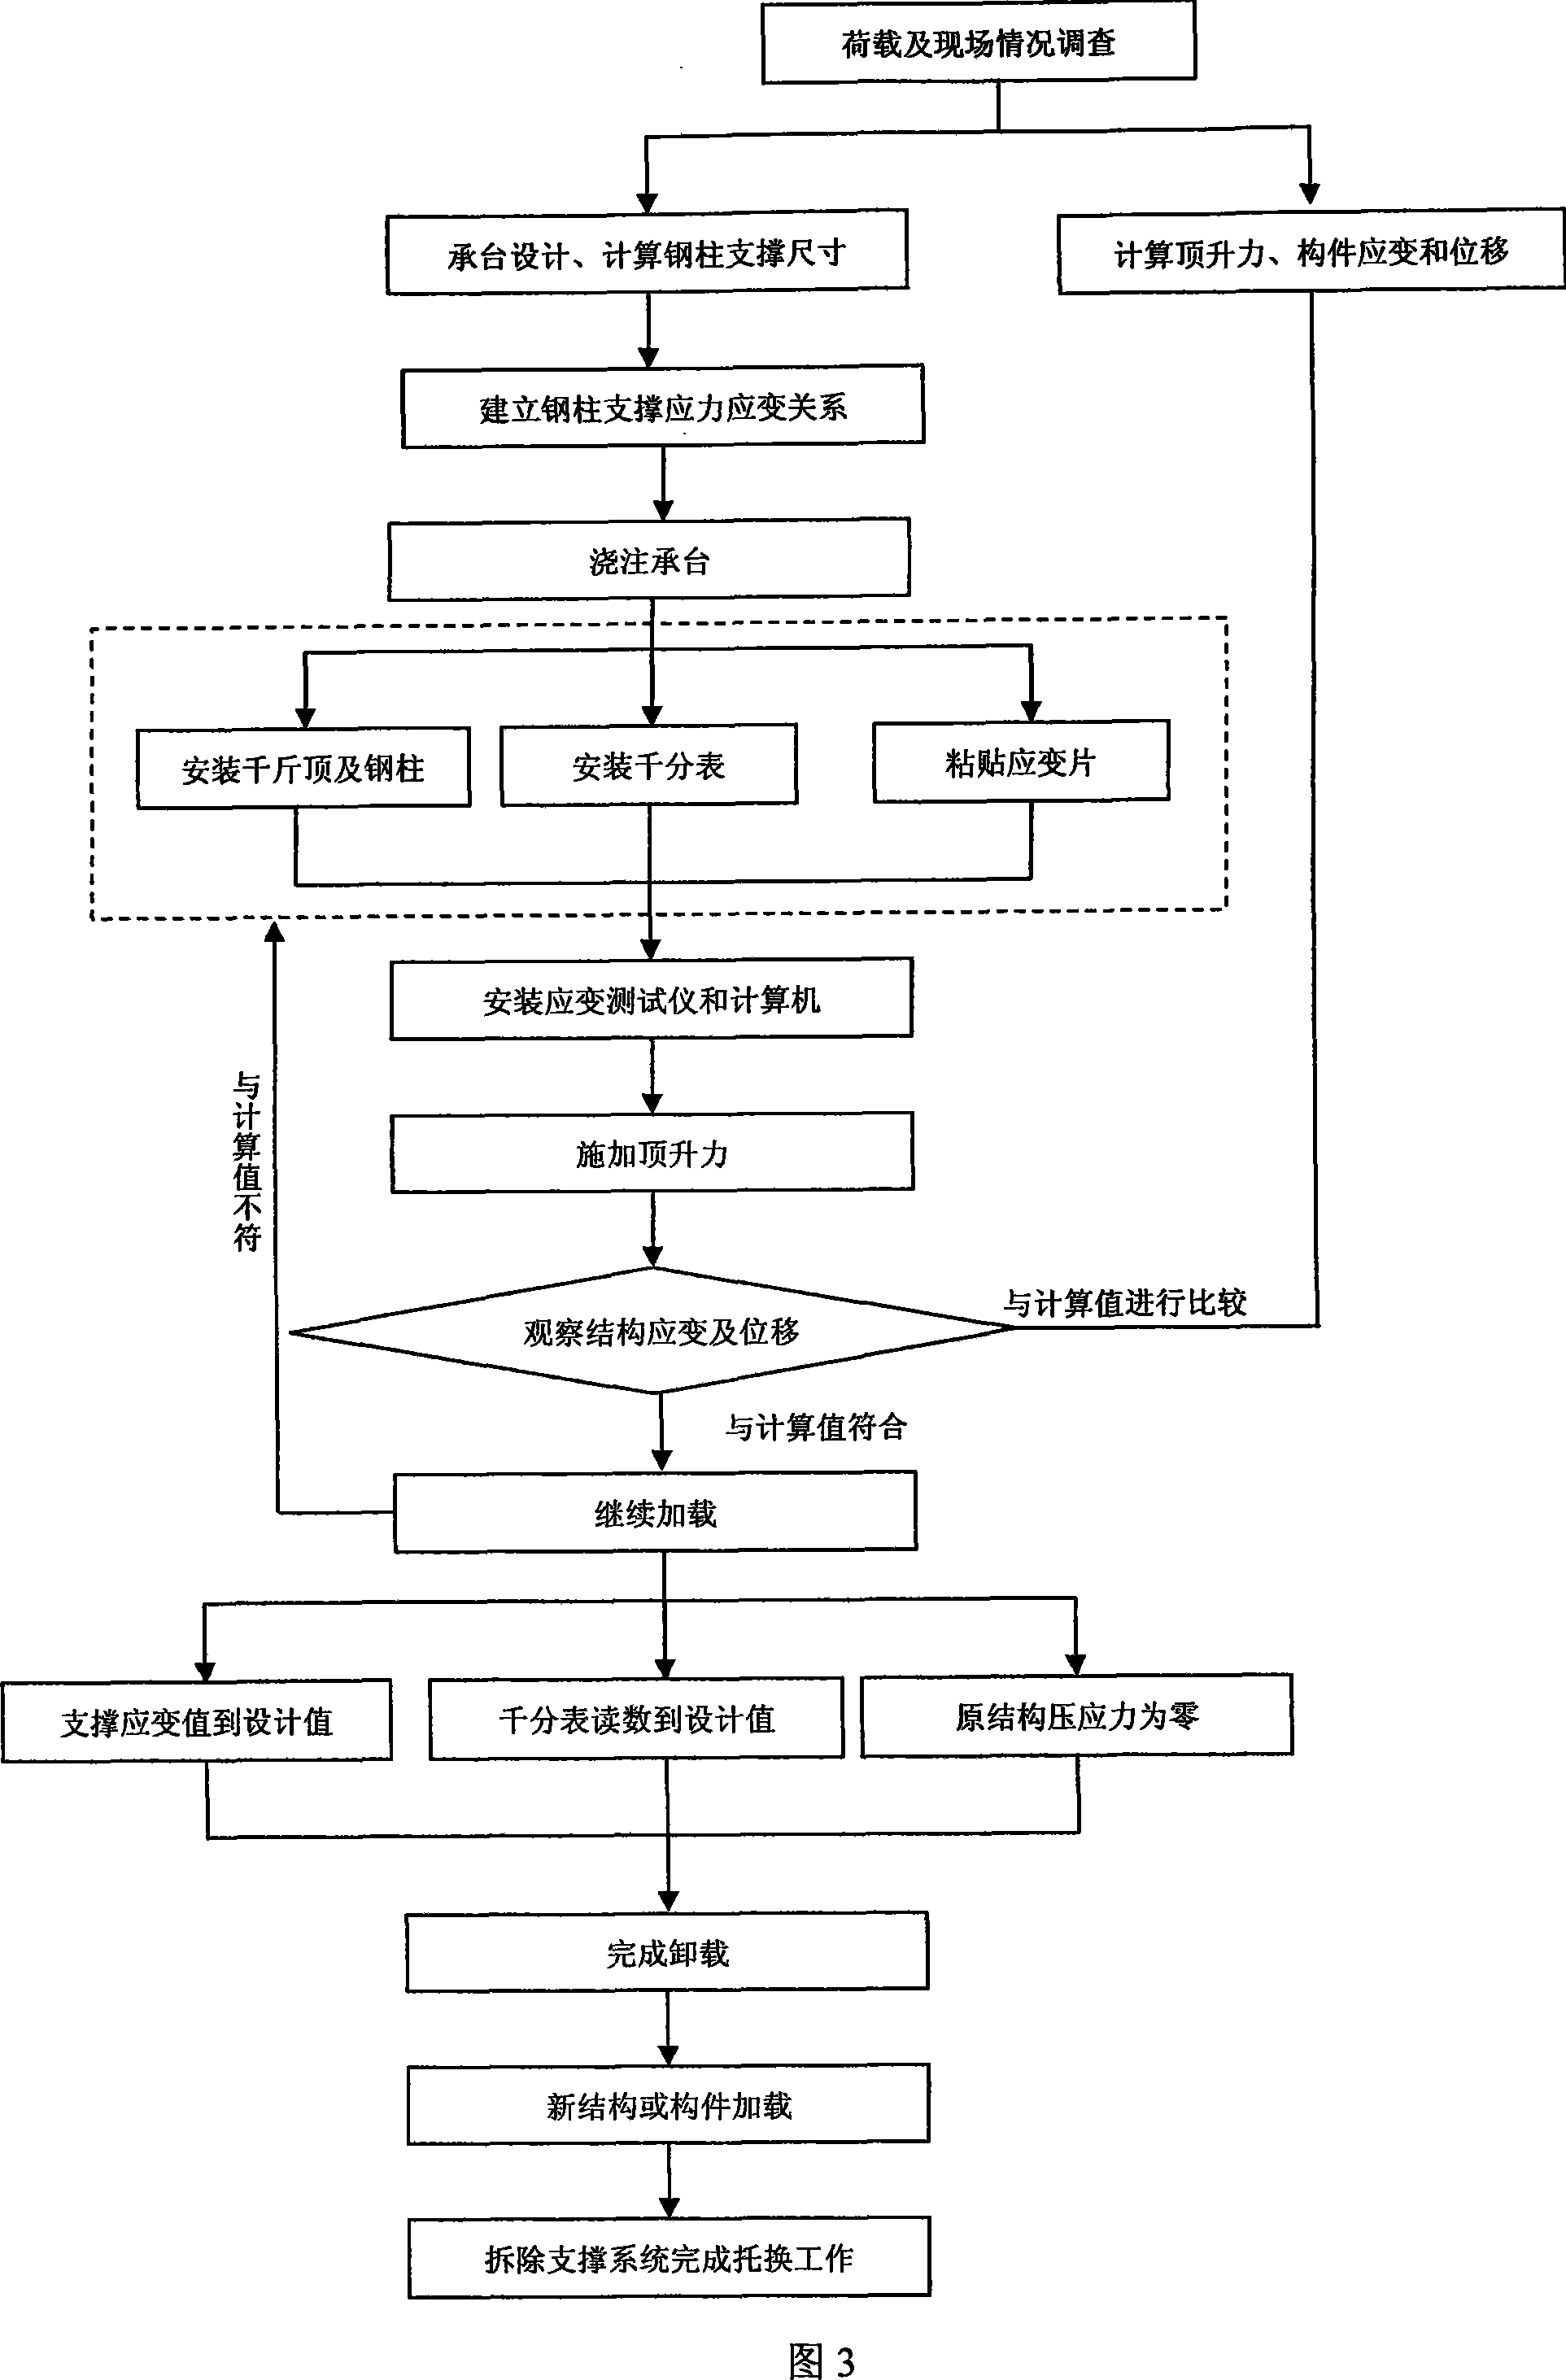 Strain computer-controlled beam support and change method